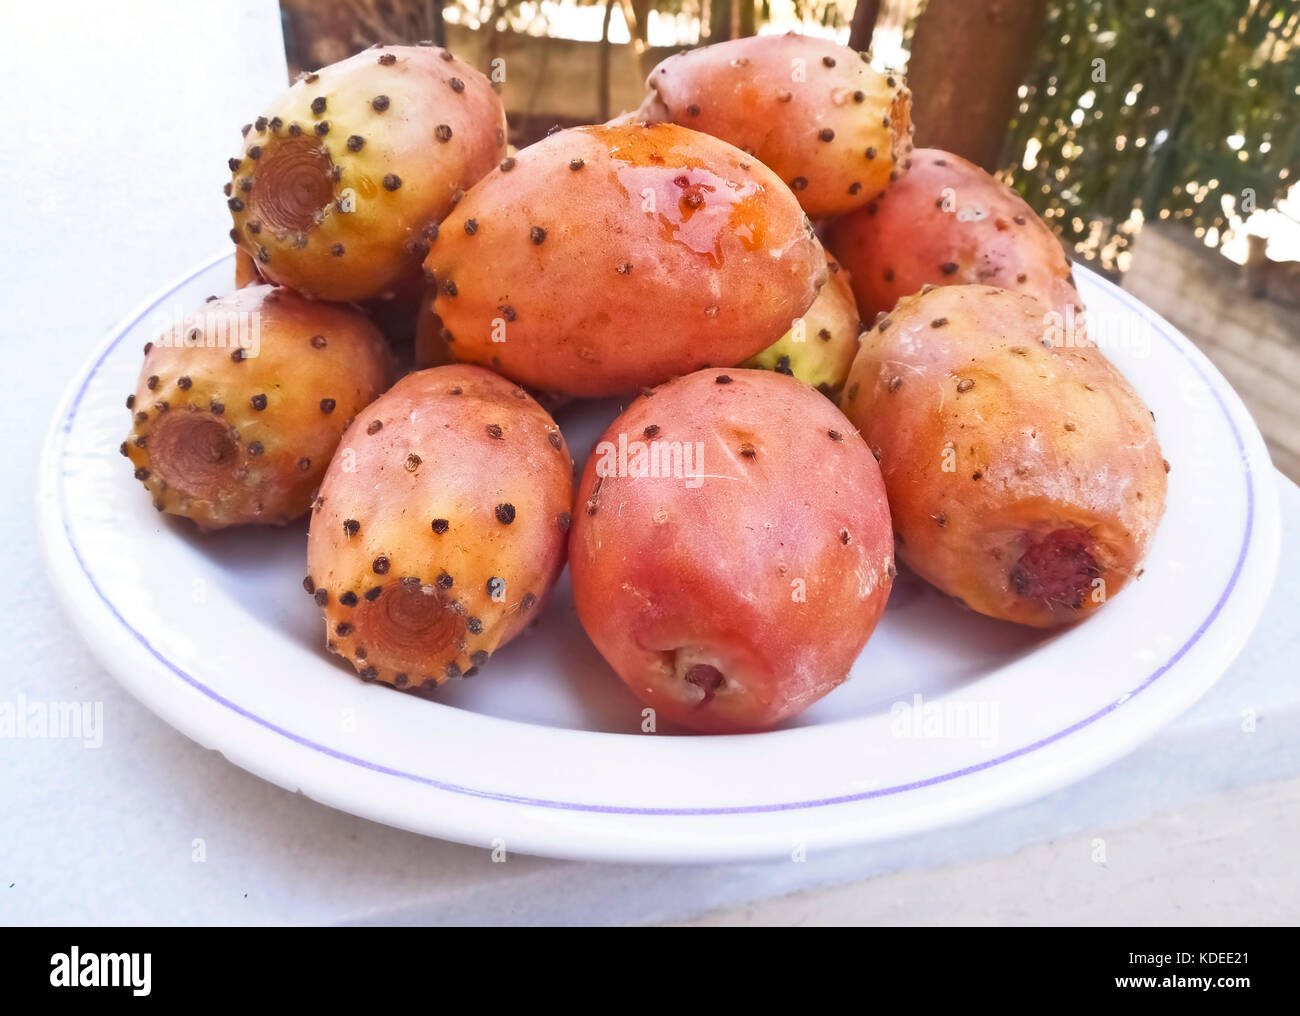 fresh prickly pear fruits on plate Stock Photo